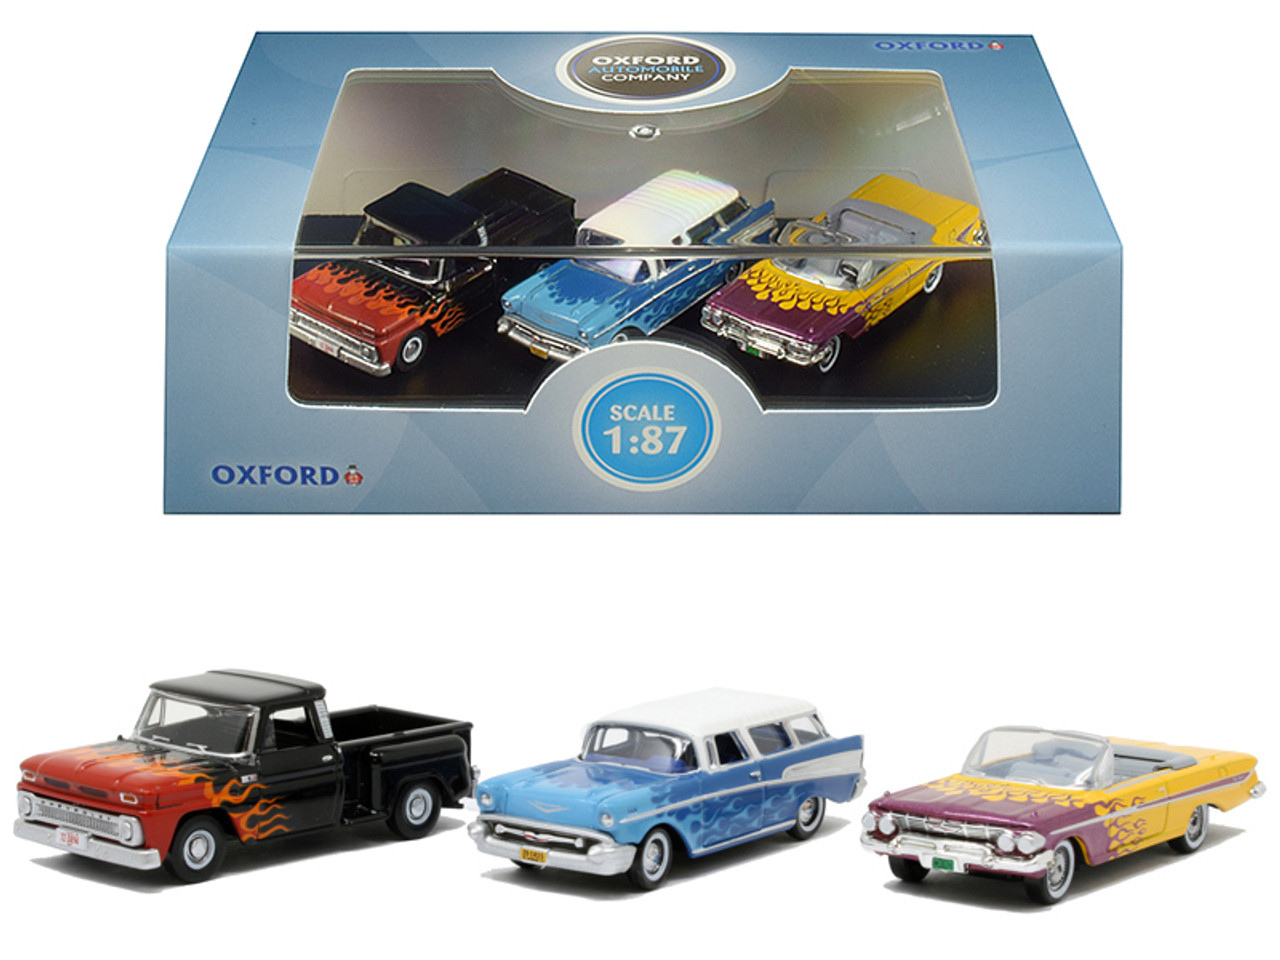 "Chevrolet Hot Rods" Set of 3 pieces 1/87 (HO) Scale Diecast Model Cars by Oxford Diecast